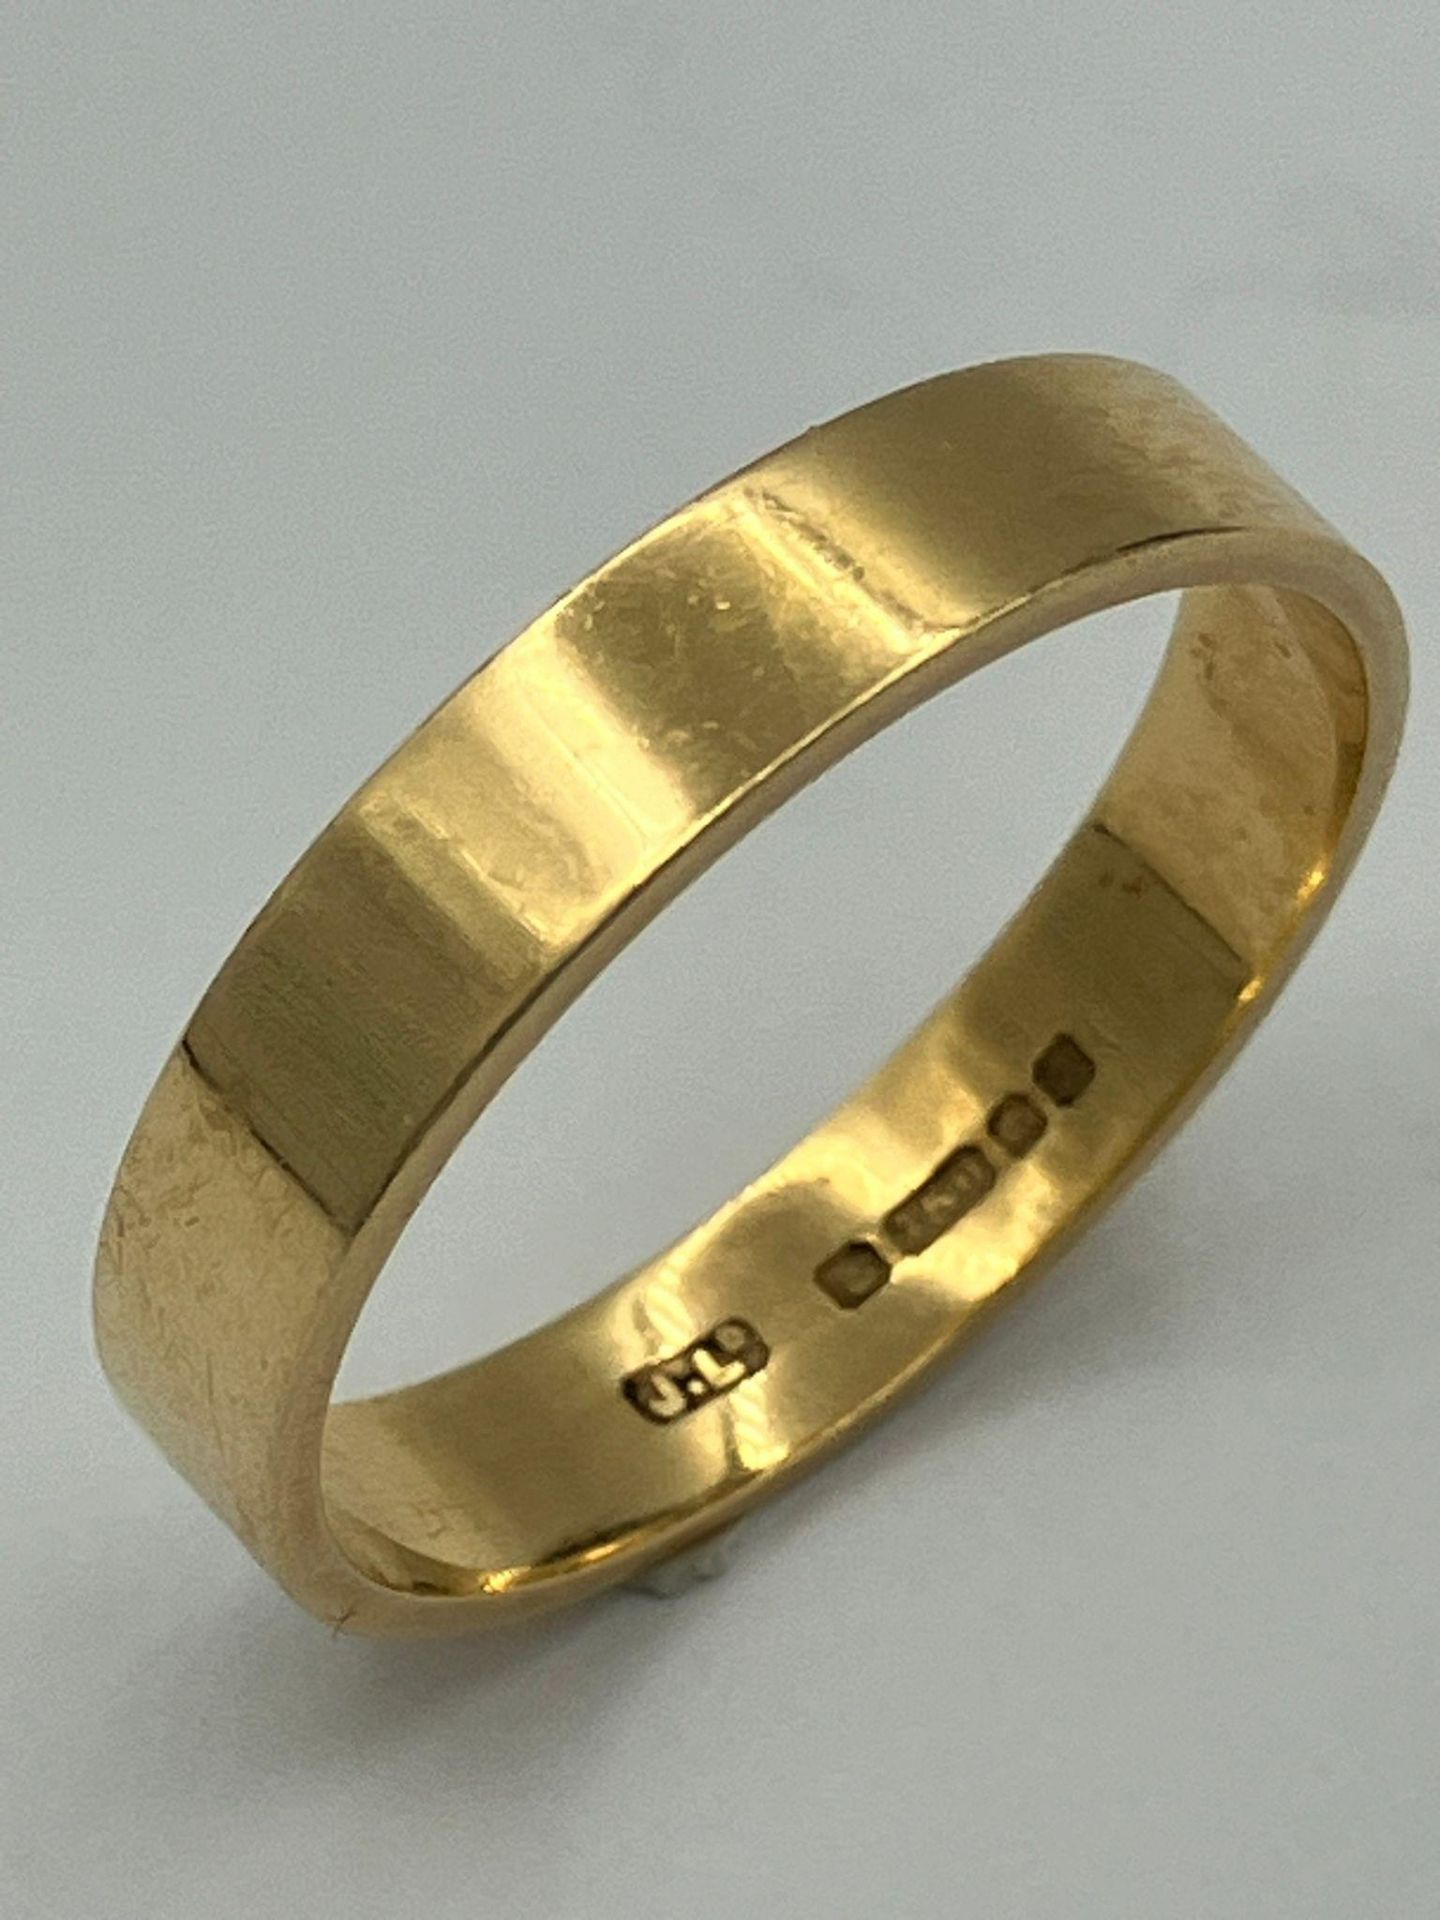 18 carat GOLD BAND RING. Having beautiful smooth clean lines with full UK hallmark. 3.3 grams.